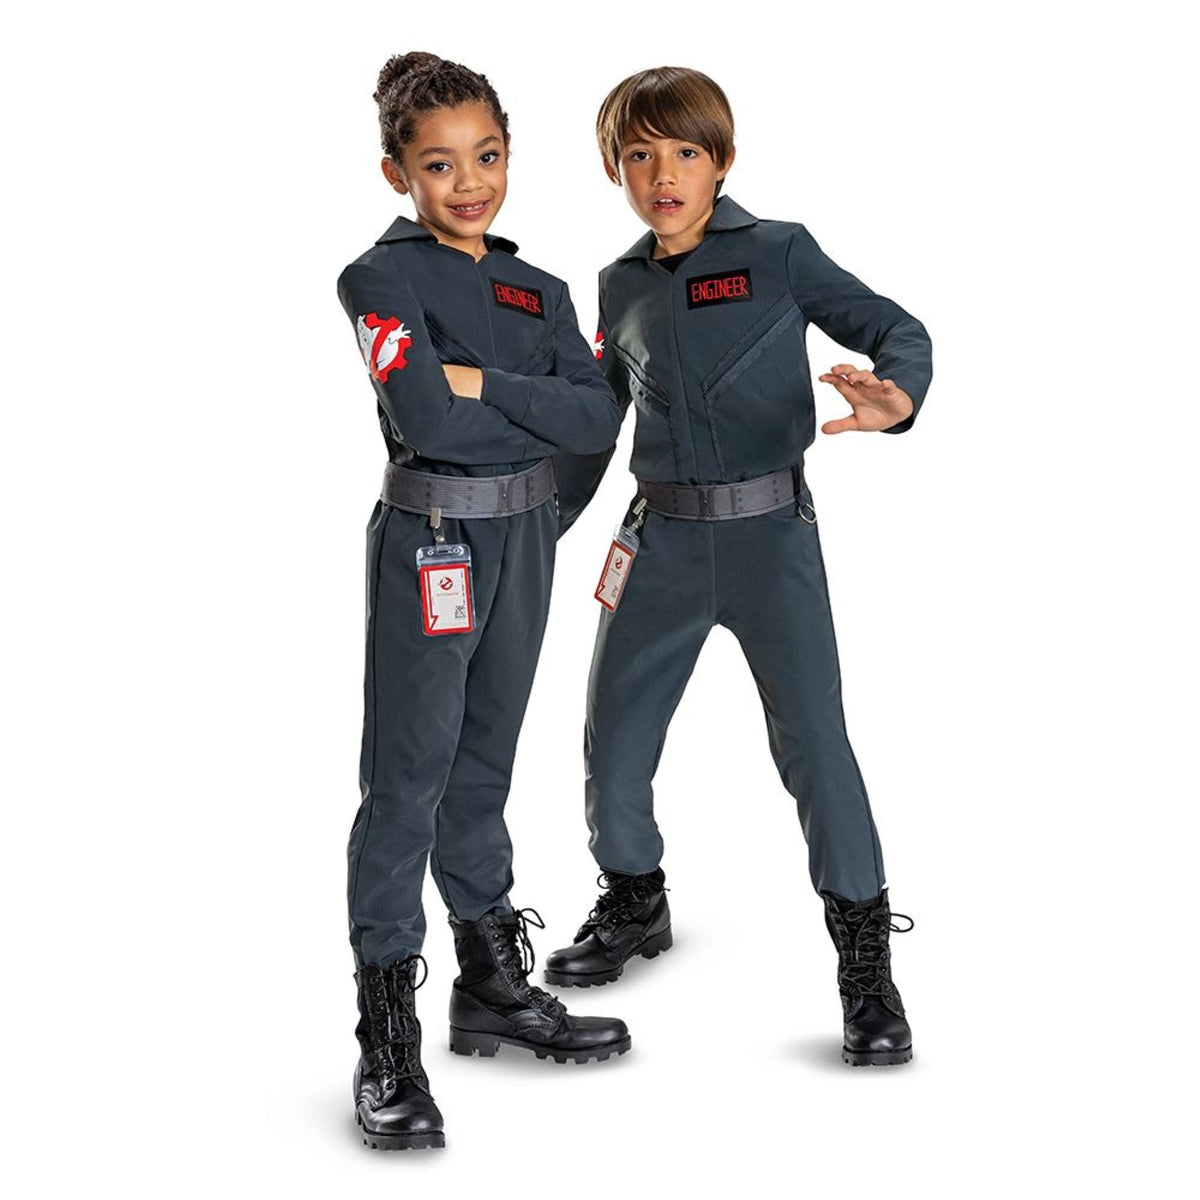 DISGUISE (TOY-SPORT) Costumes Ghostbusters: Frozen Empire Engineering Classic Costume for Kids, Black Jumpsuit